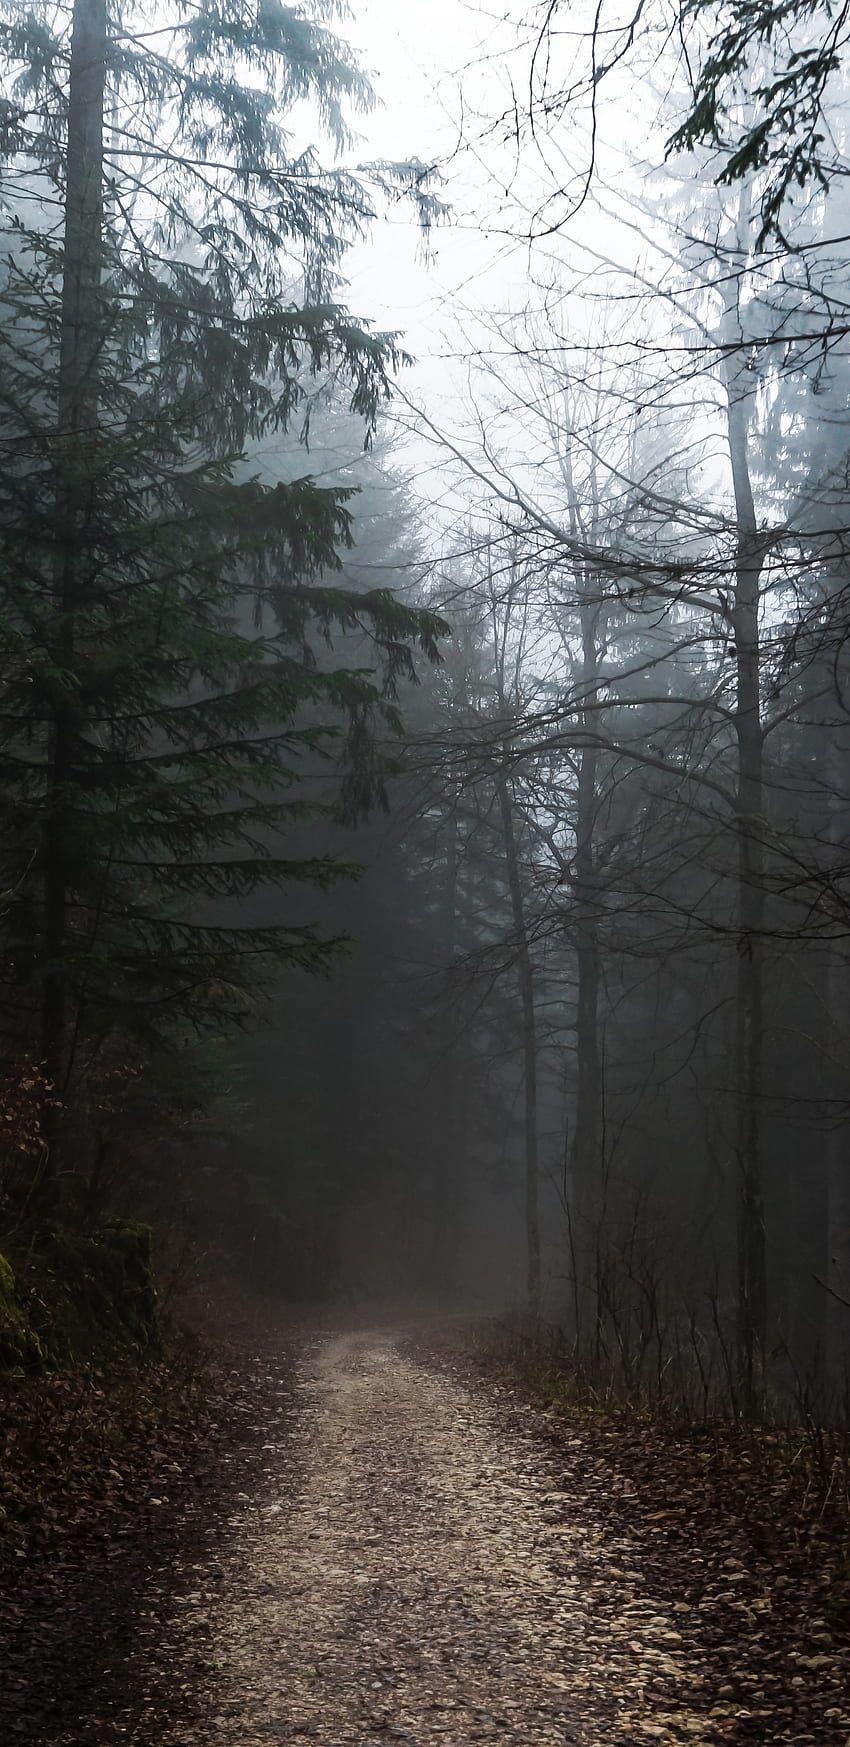 A path in the woods surrounded by trees - Fog